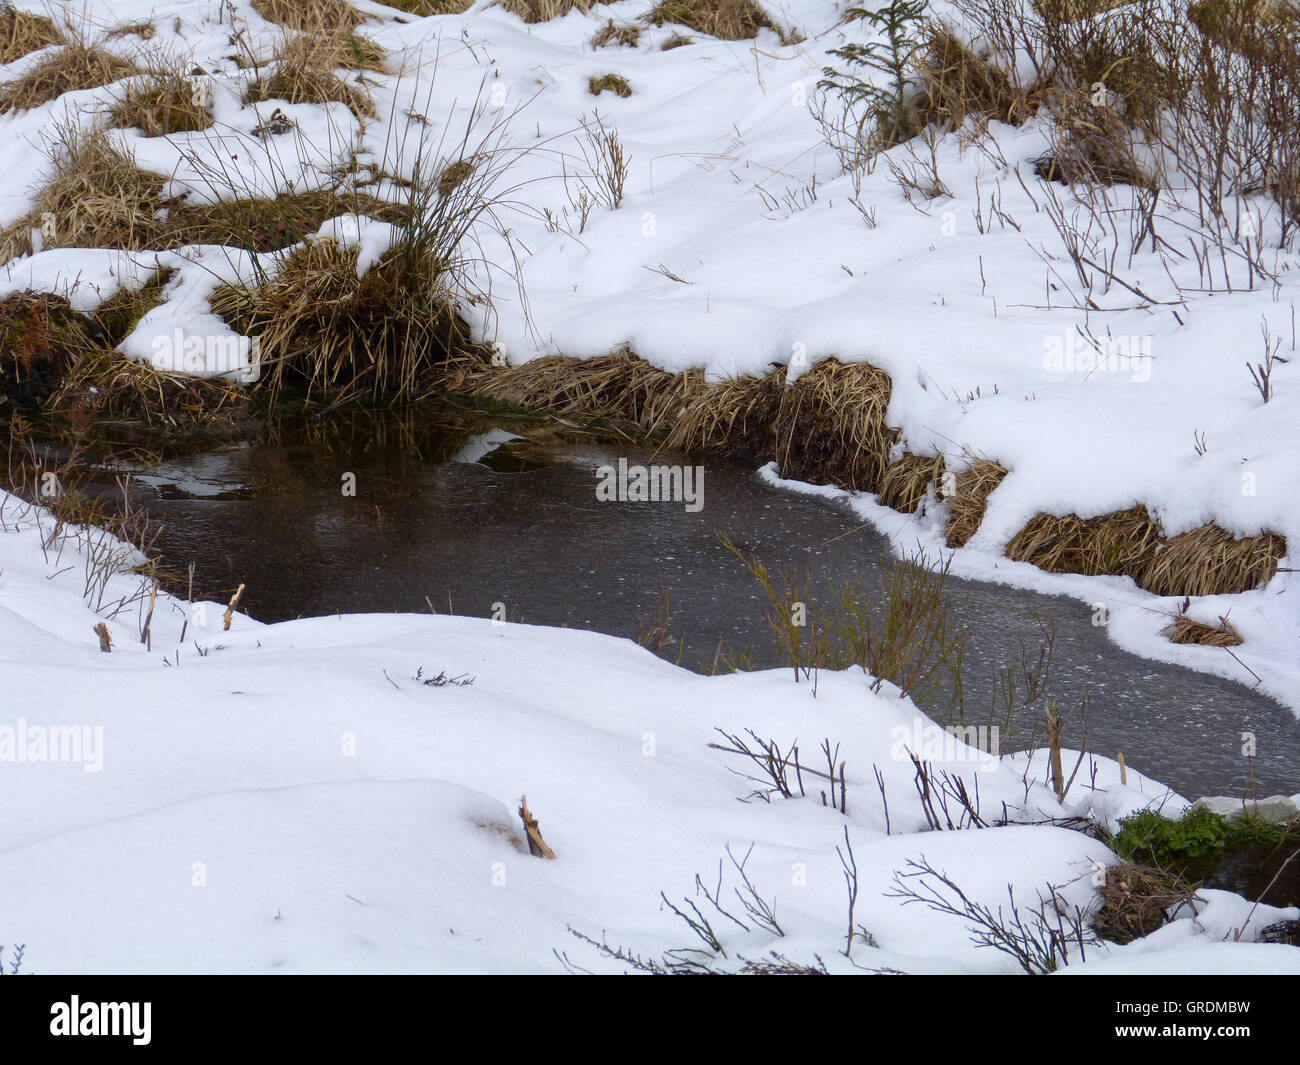 Brook Flows Through Wintry Landscape Stock Photo